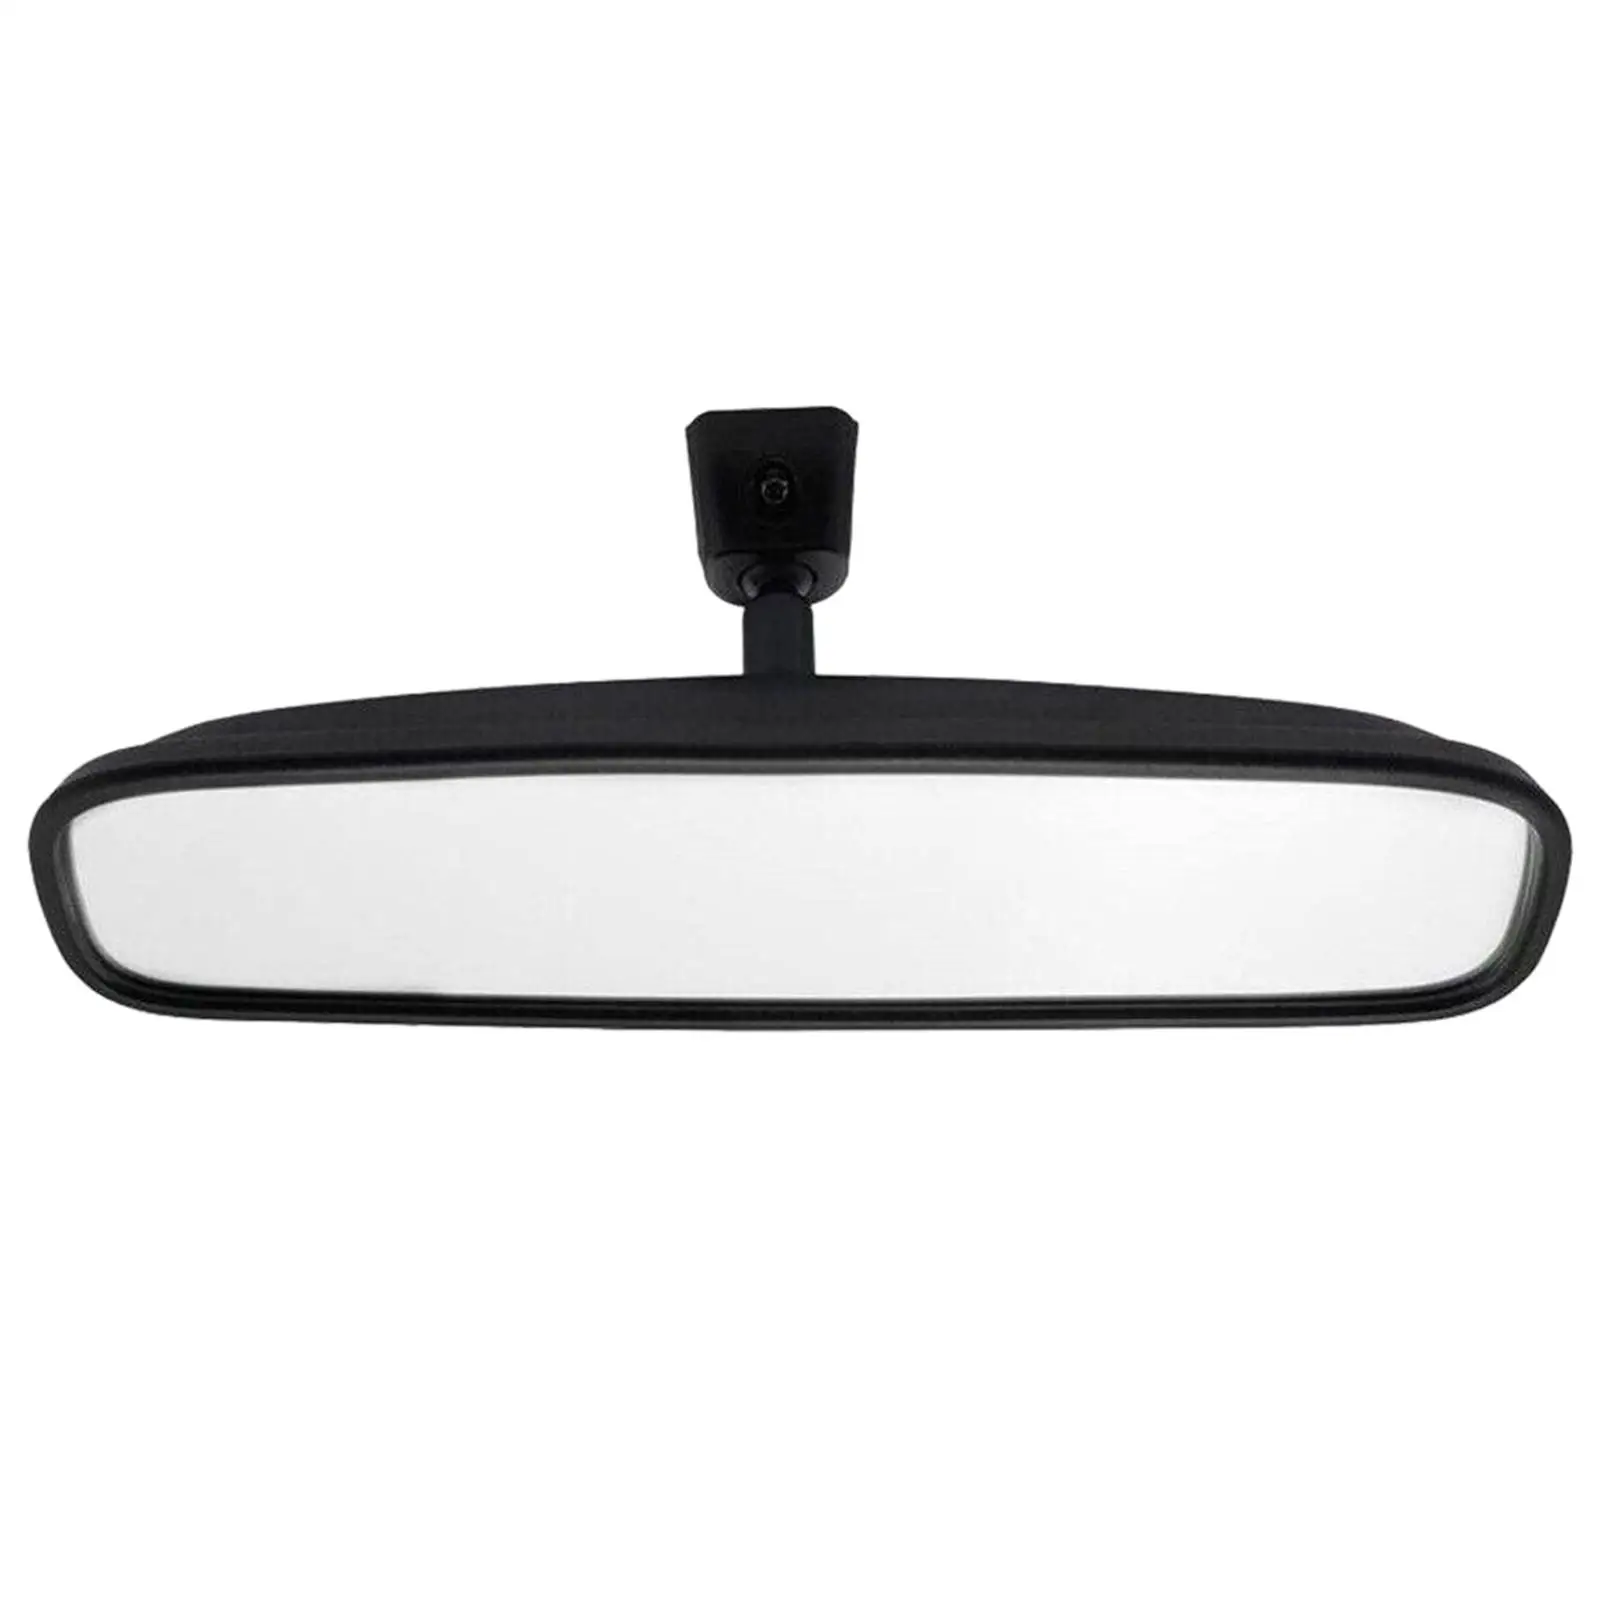 Inside Rearview Center Mirror 85101-3x100 Replacement Parts for Hyundai Elantra 1.8L 2.0L Easily Install Stable Performance